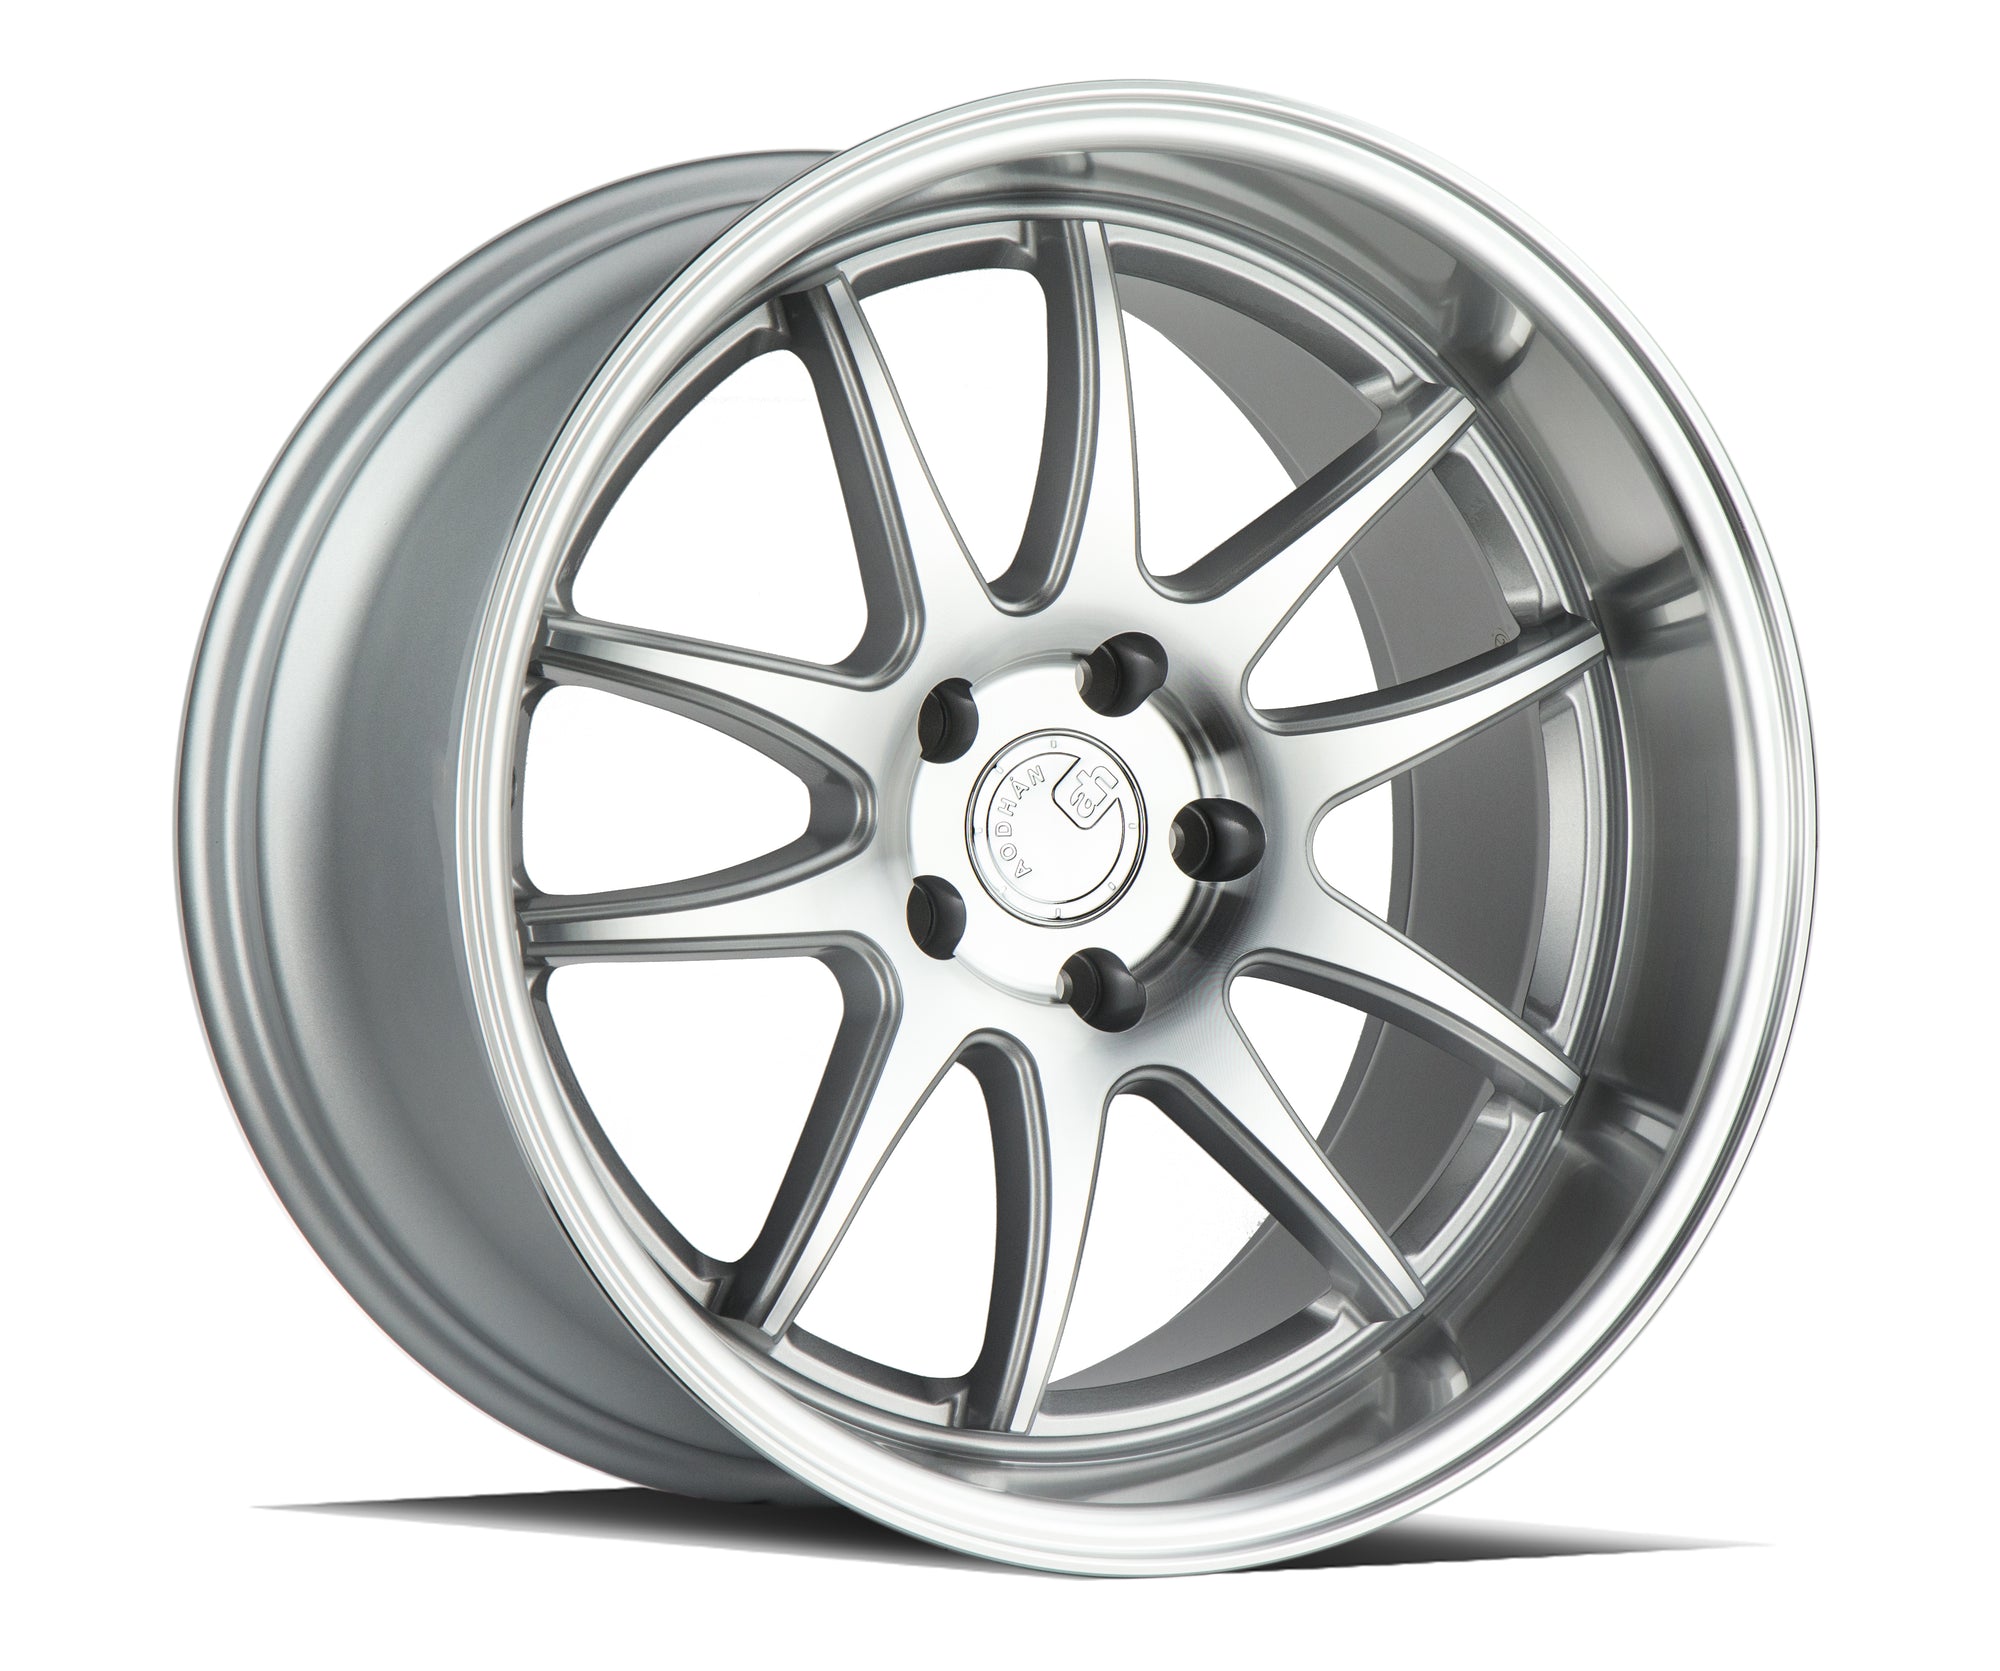 Aodhan DS02 18x10.5 5x114.3 +15 Silver w/Machined Face